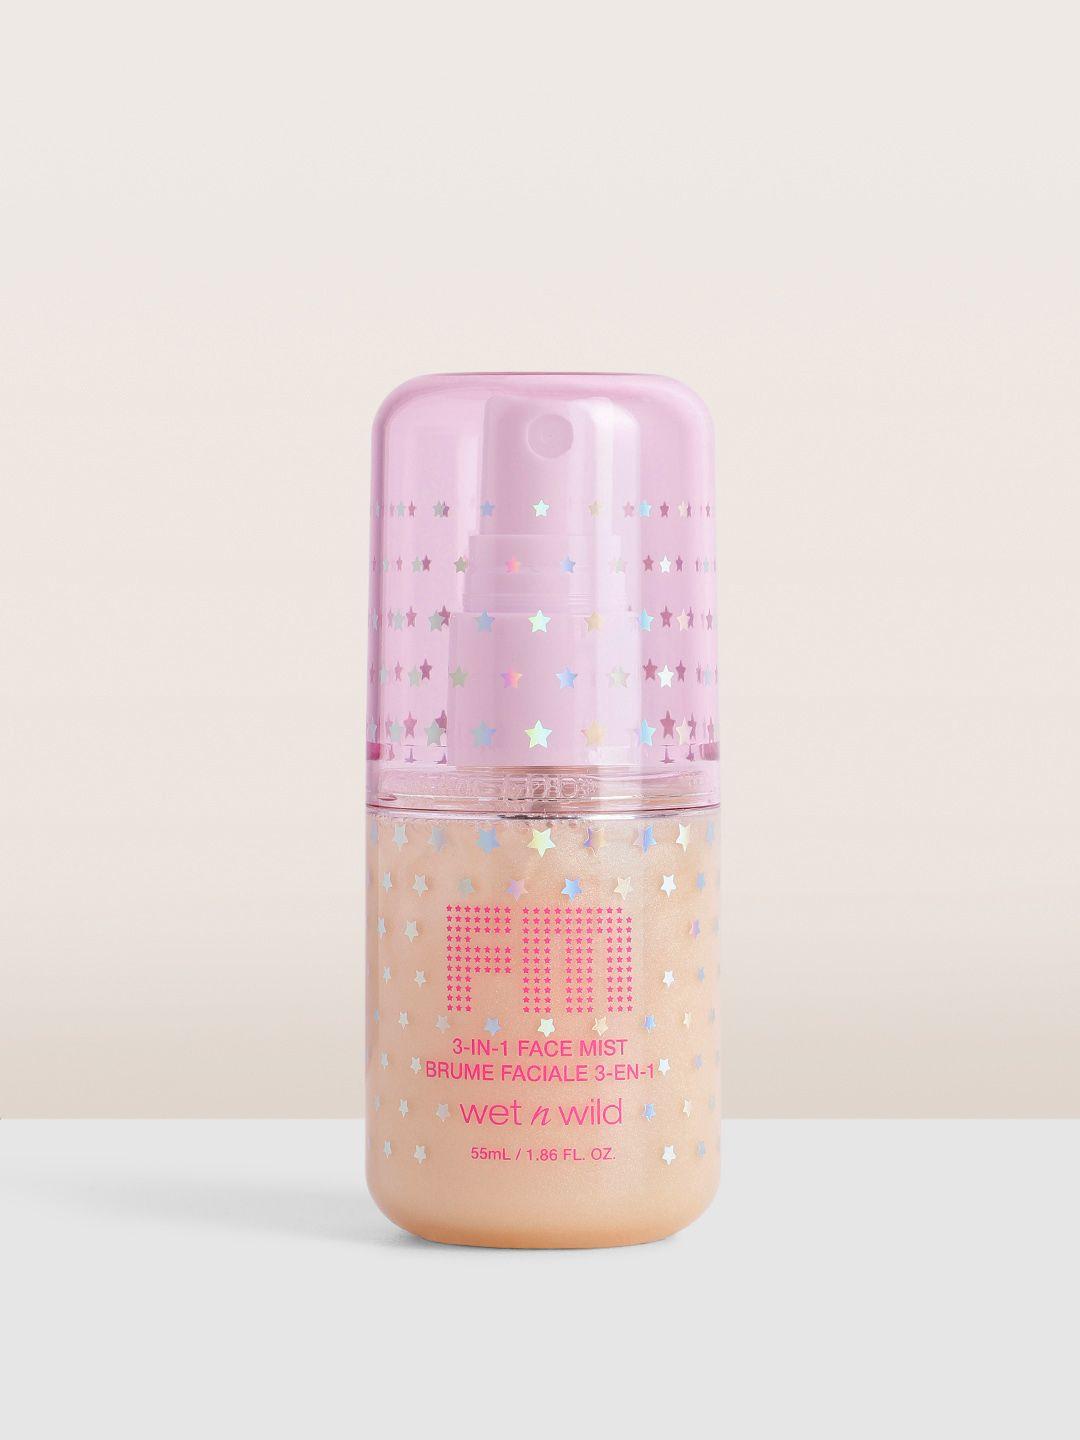 wet-n-wild-fantasy-maker-3-in-1-face-mist-with-papaya-&-coconut-water-55ml---dewy-illusion